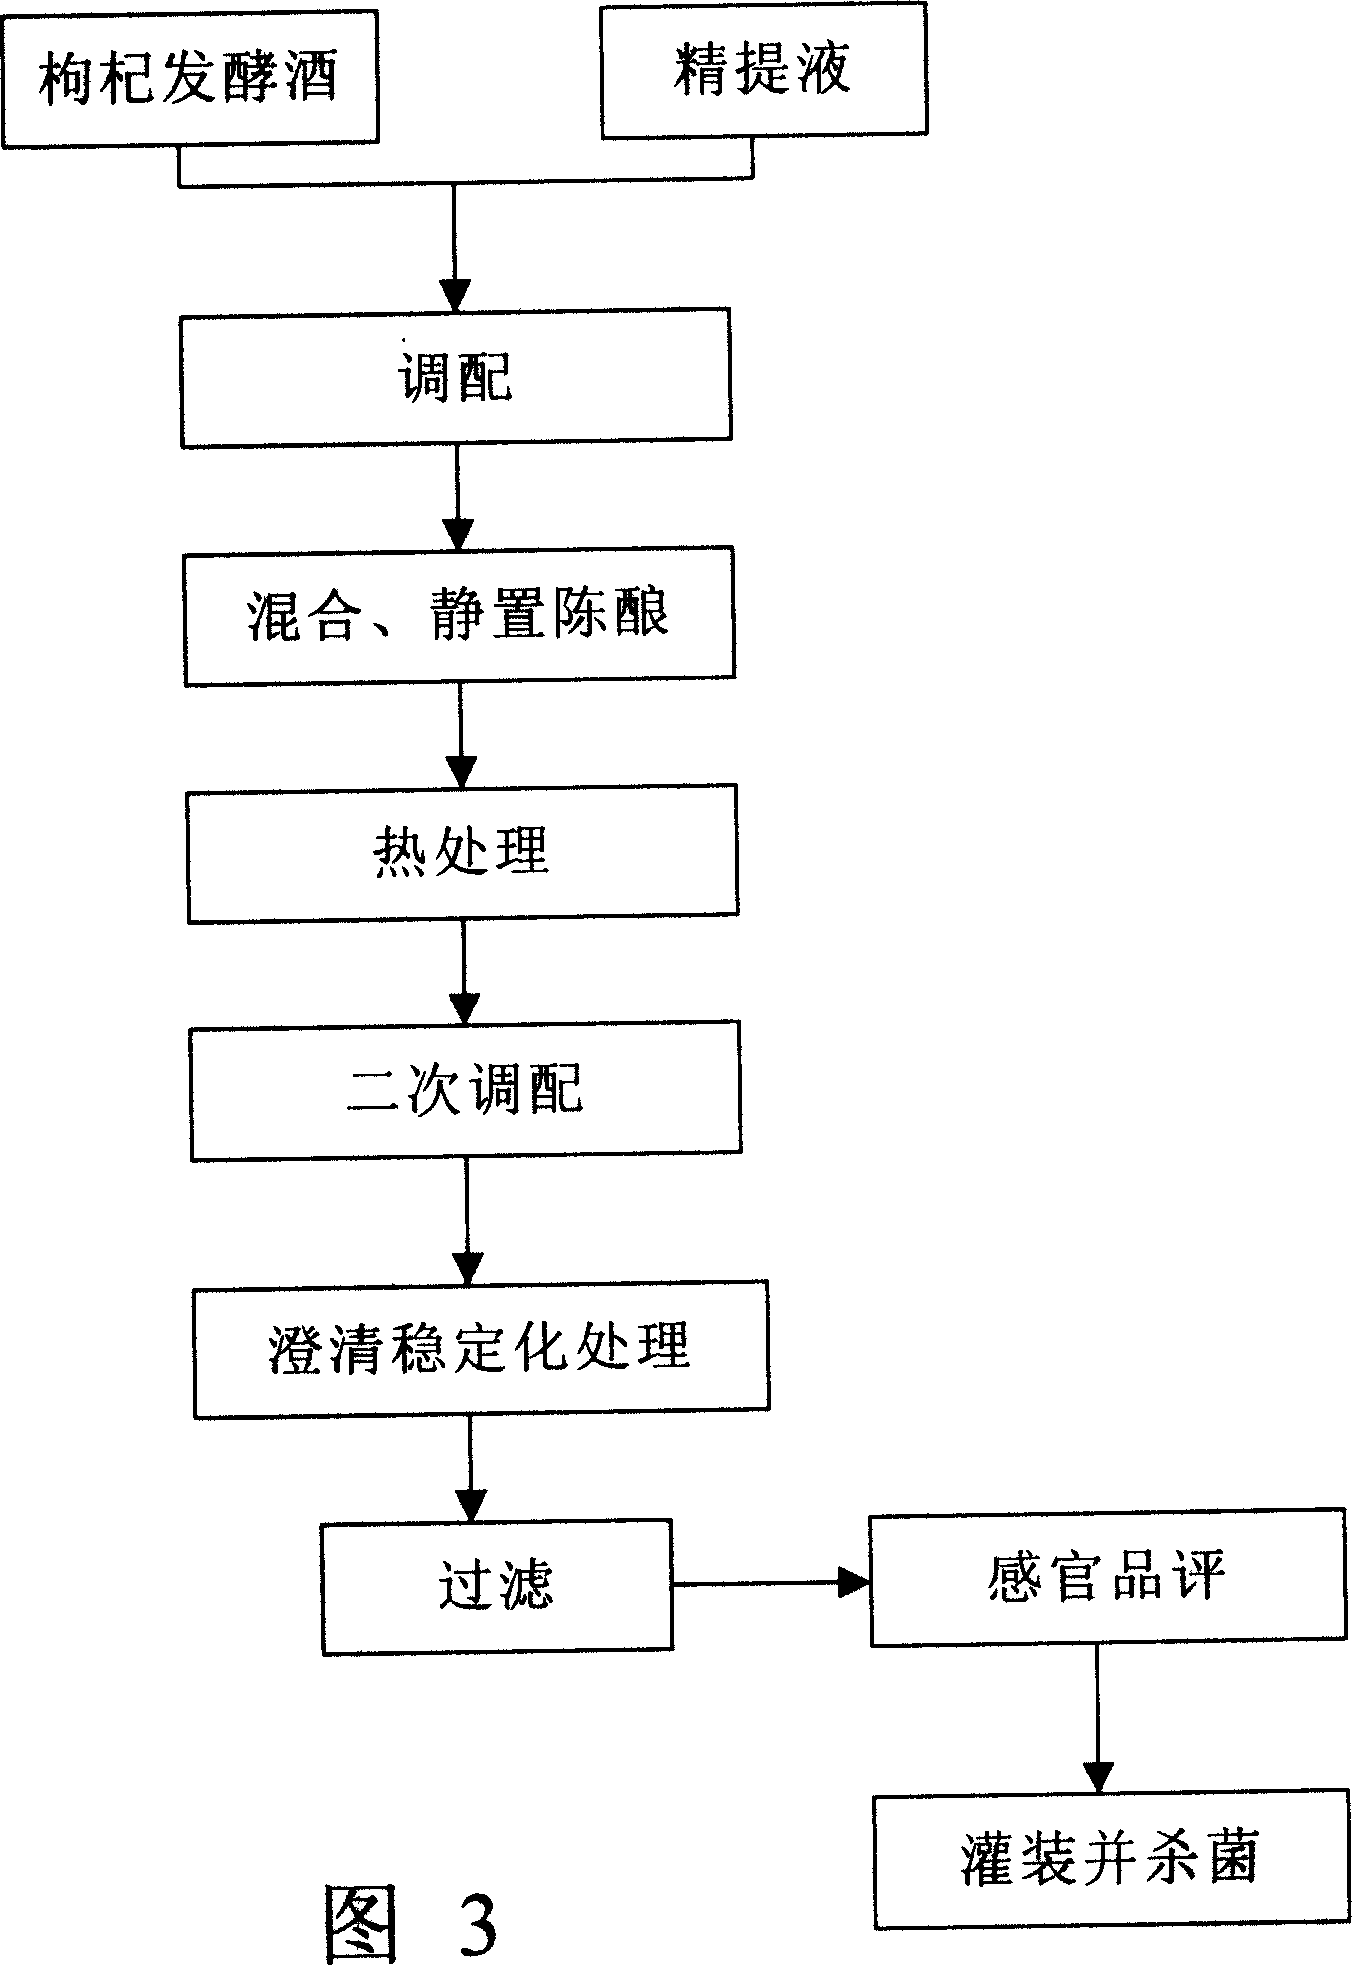 Method for producing Chinese wolfberry liquor